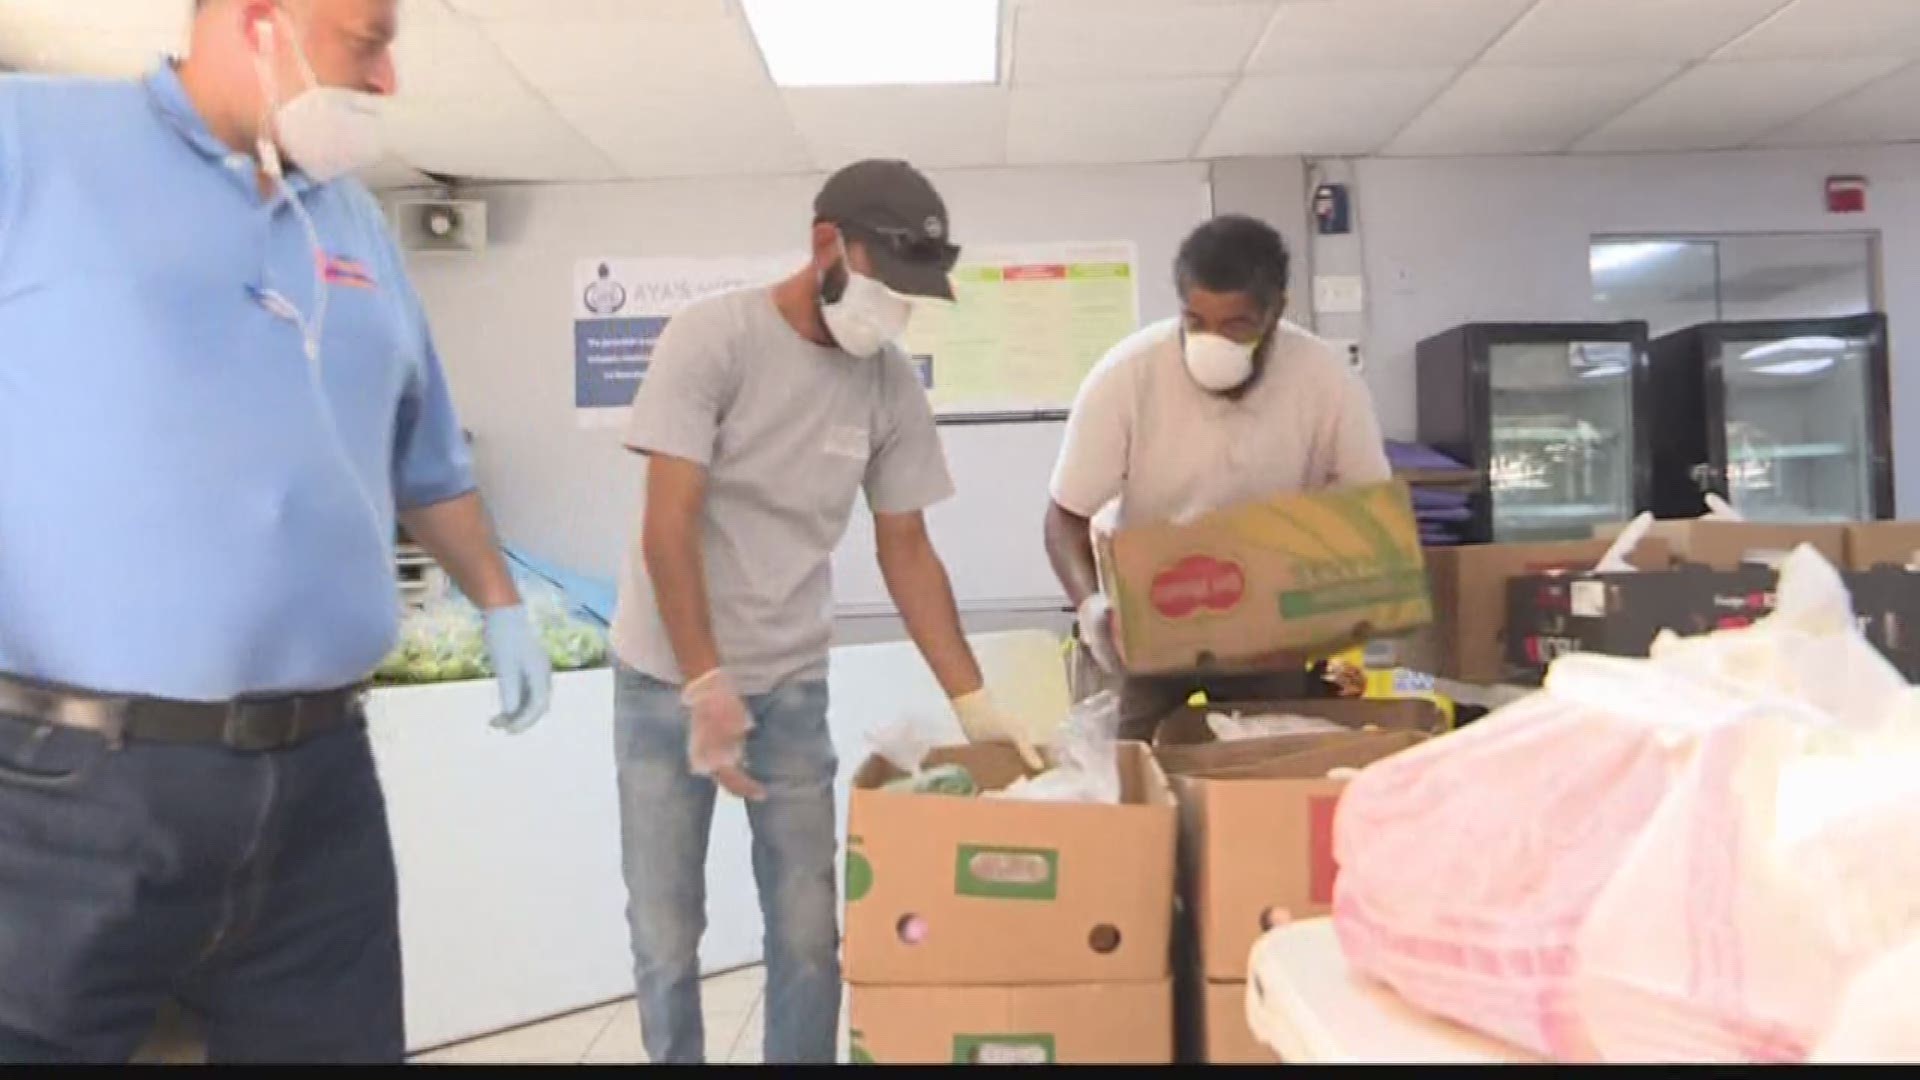 10News photojournalist Chad Crowmwell caught up with members of the Islamic Community of Tampa as it prepares to kick off a food distribution.